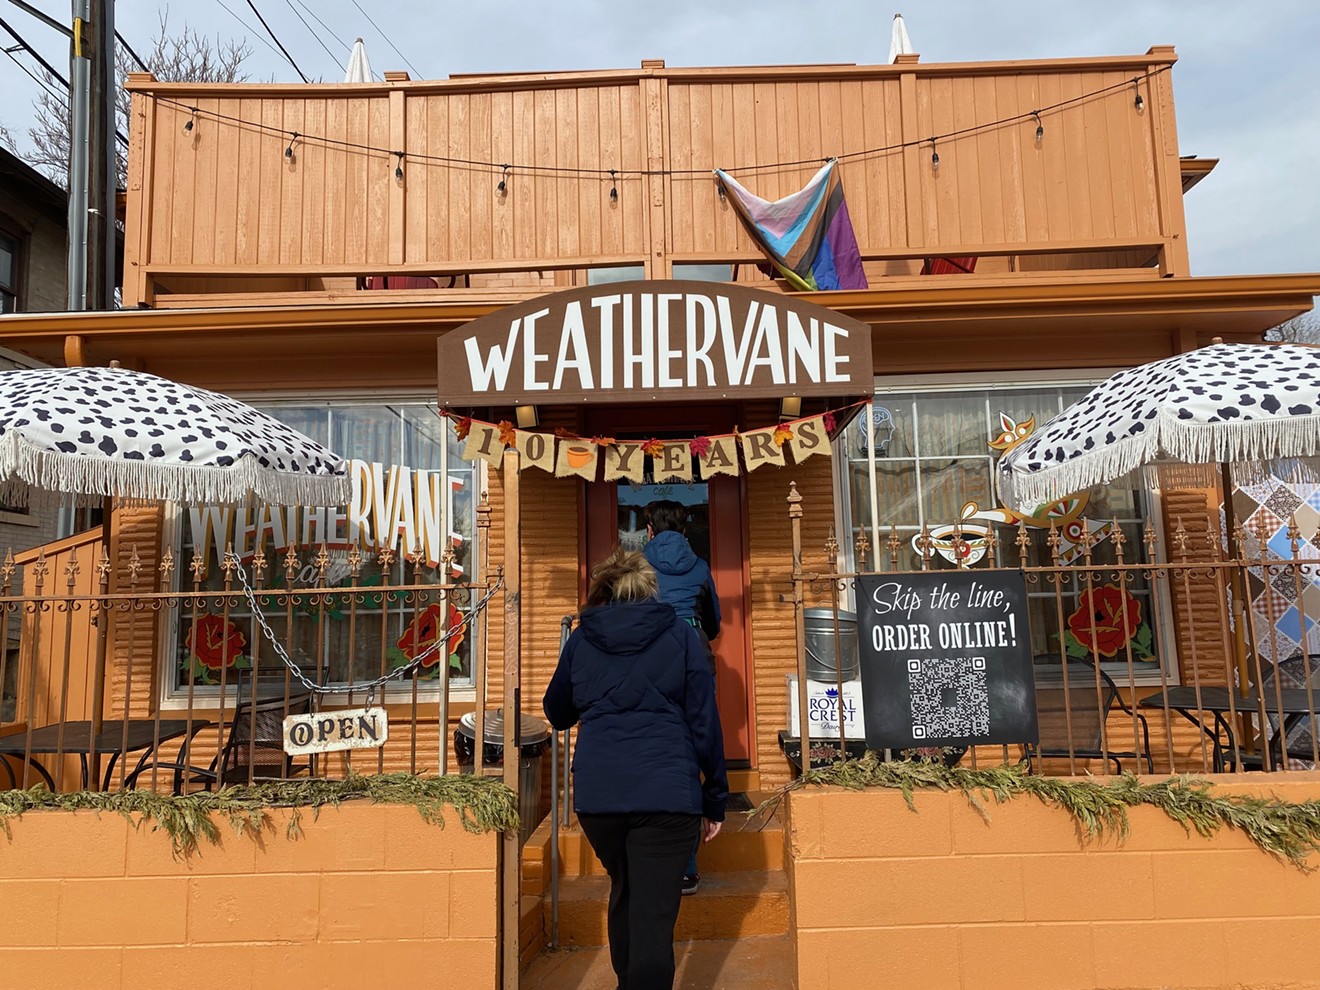 The Weathervane Cafe recently painted the exterior of its 126 year old house.